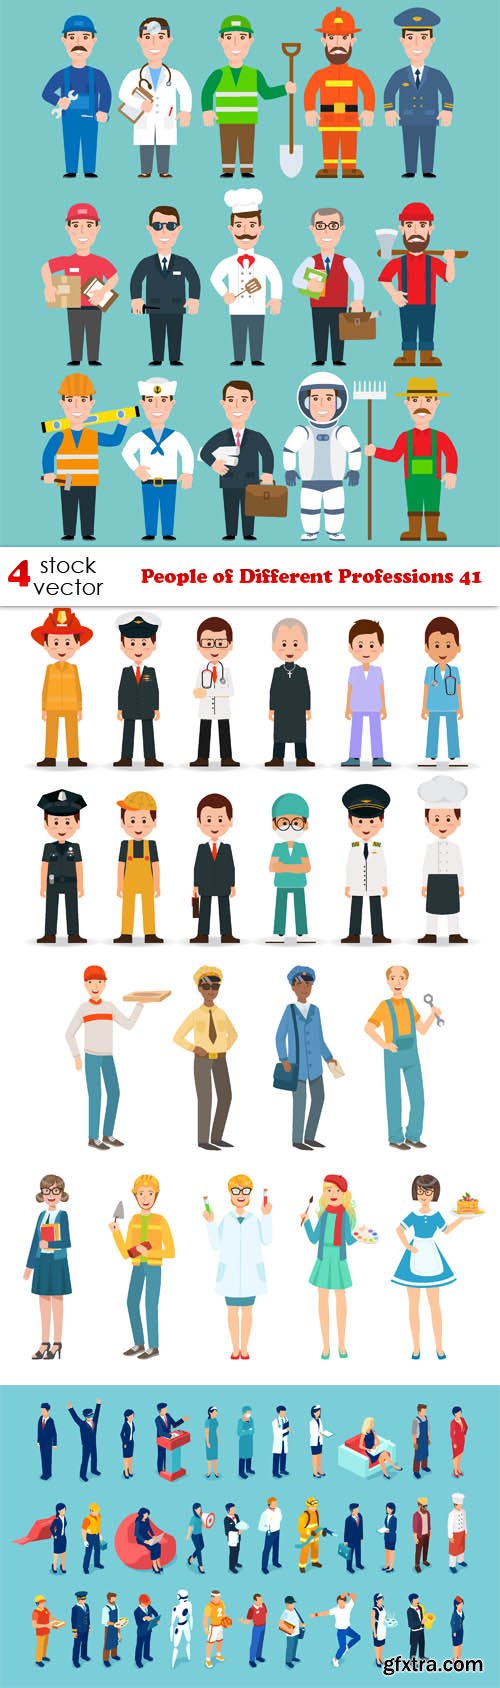 Vectors - People of Different Professions 41